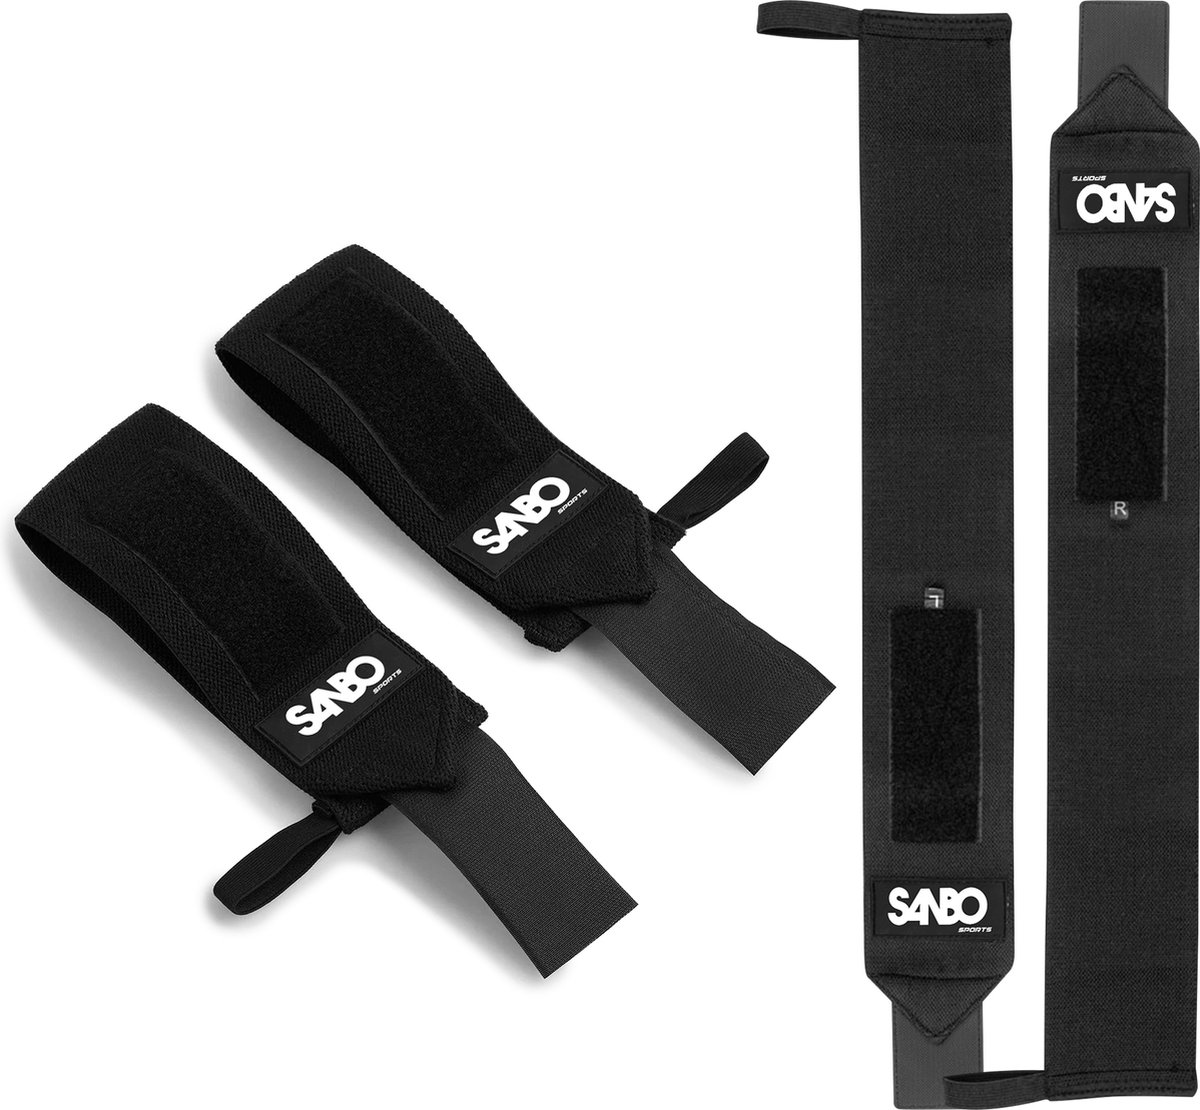 Sangles de levage Squago - Dragonne - Musculation - Fitness - Powerlifting  - Gym